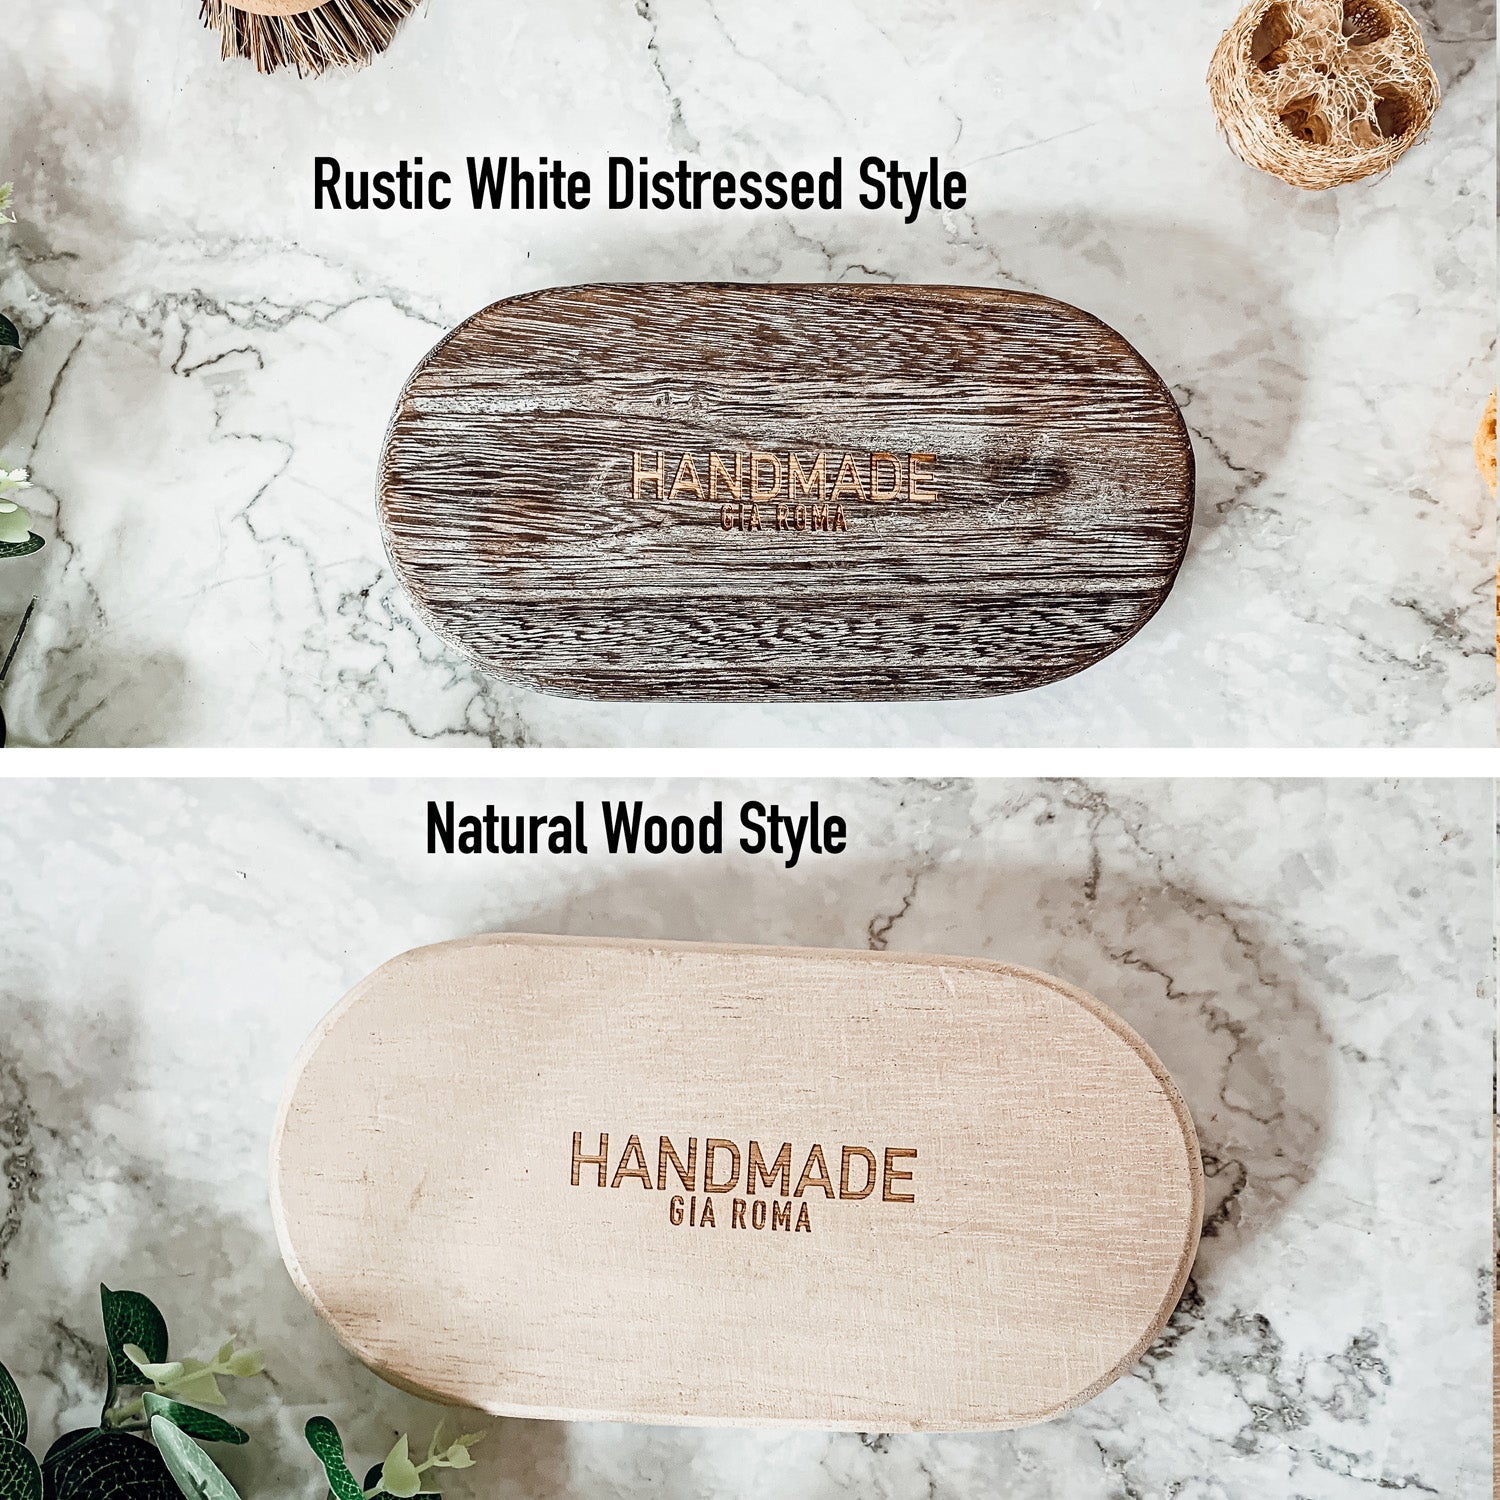 Wooden Countertop Decor and styling